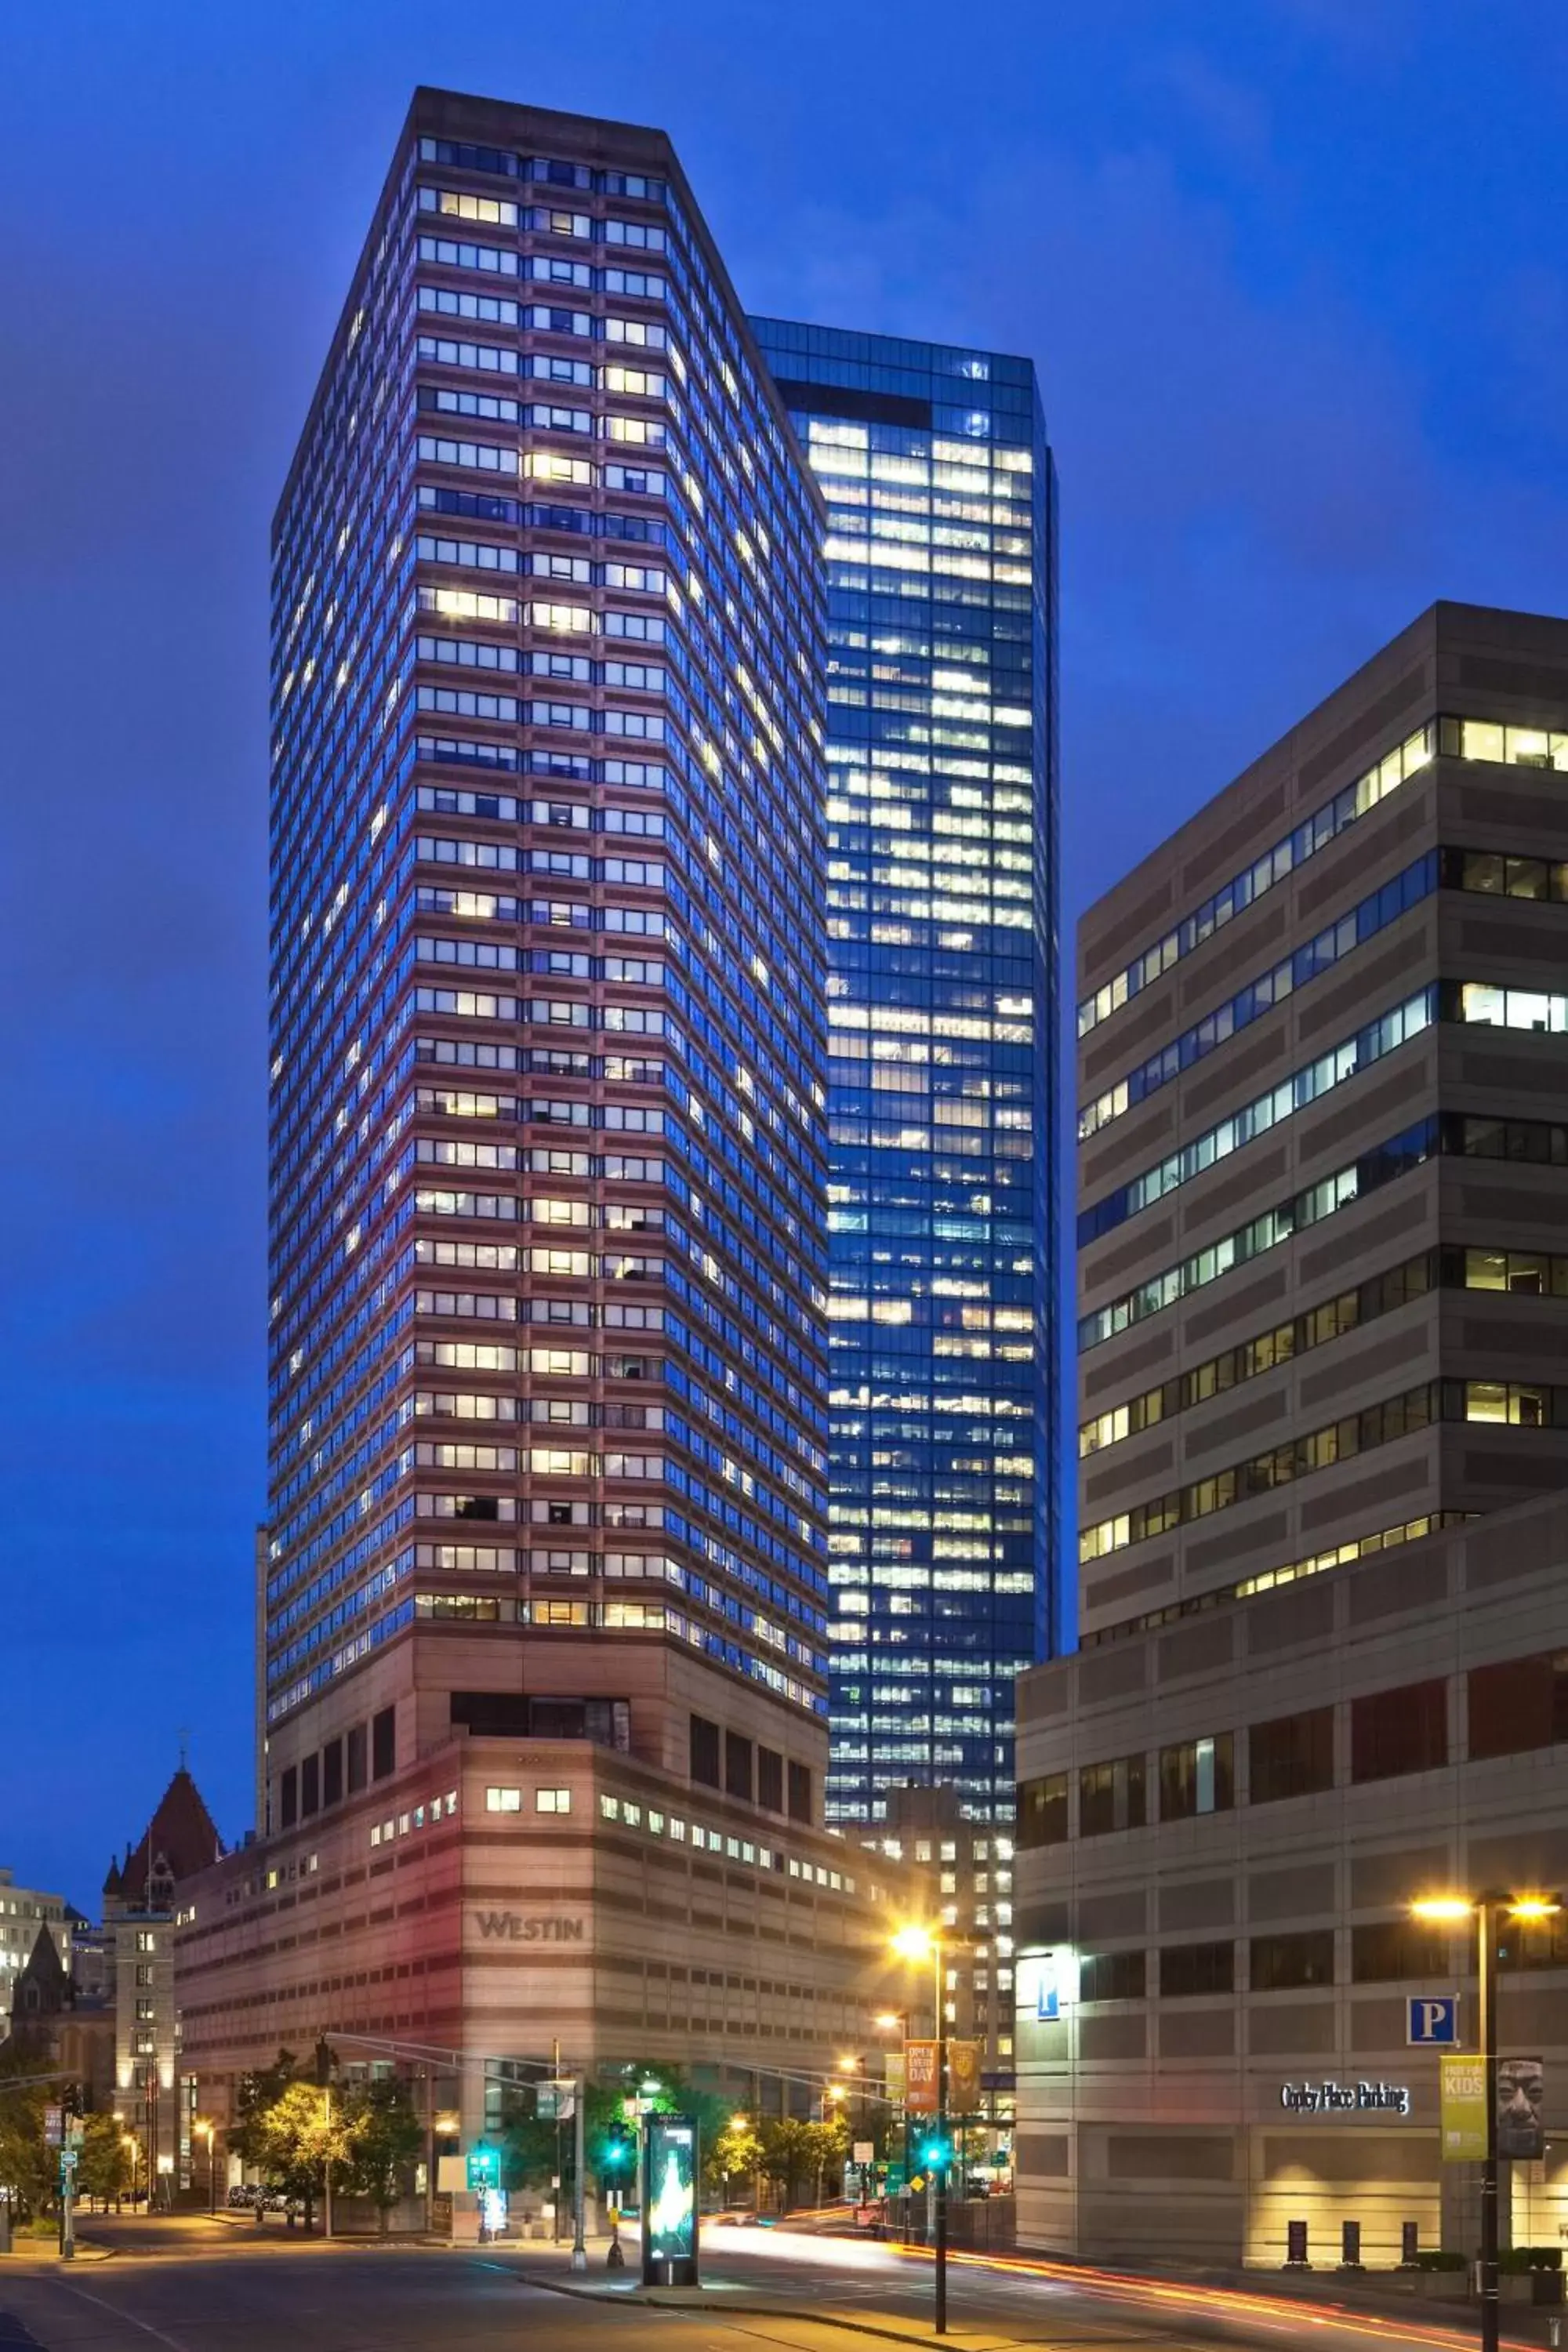 Property Building in The Westin Copley Place, Boston